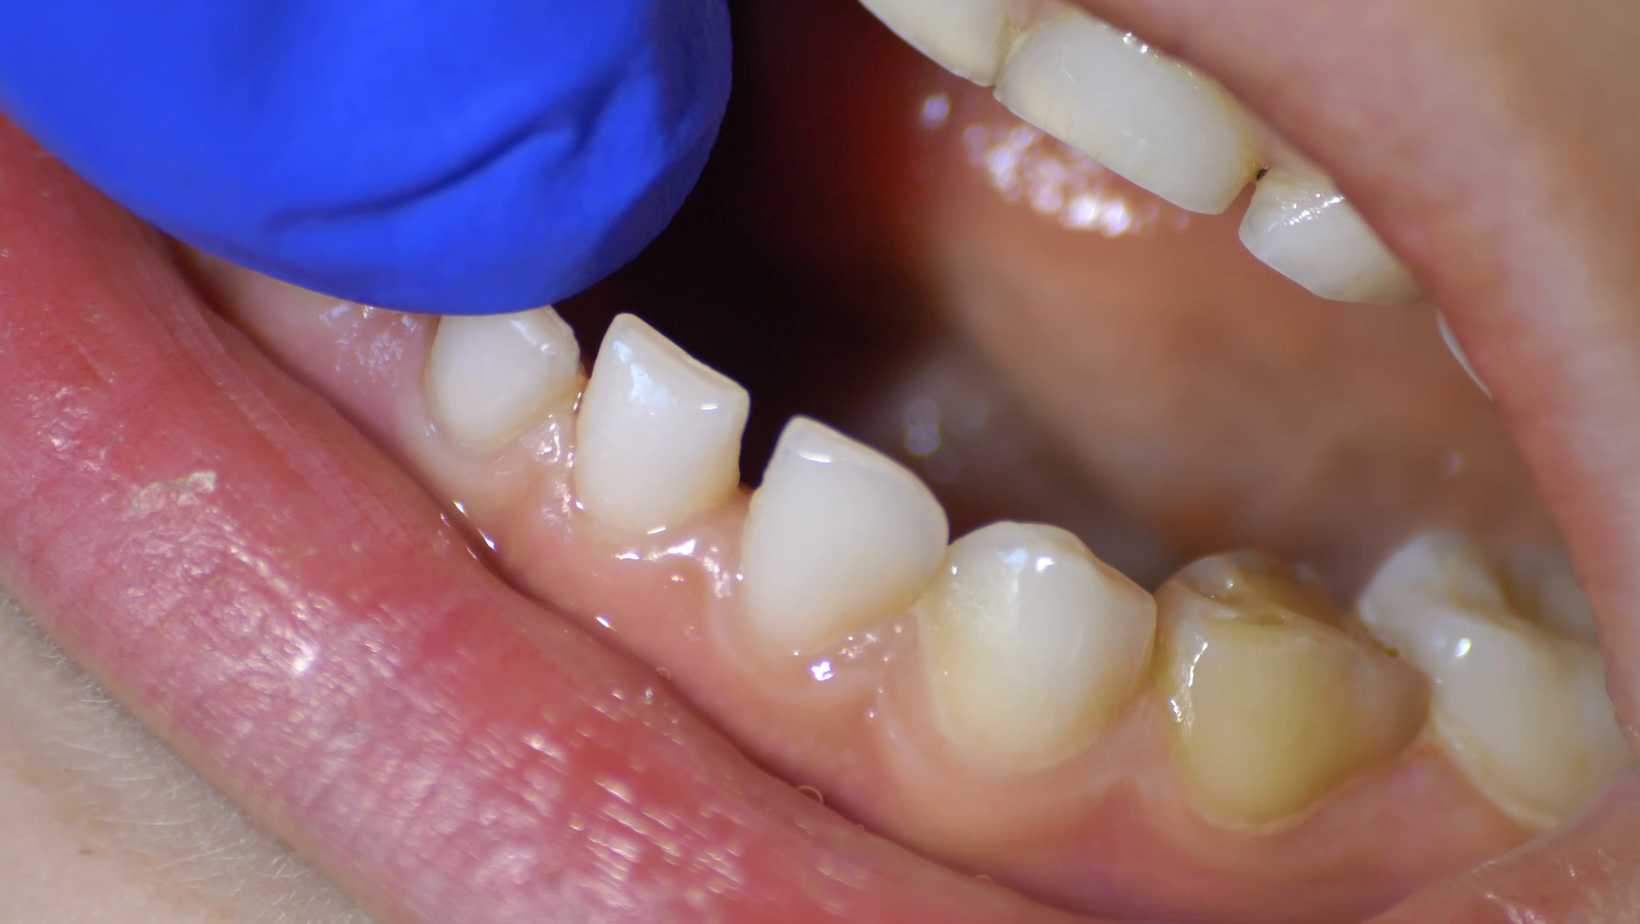 dentist hand examining a loose tooth